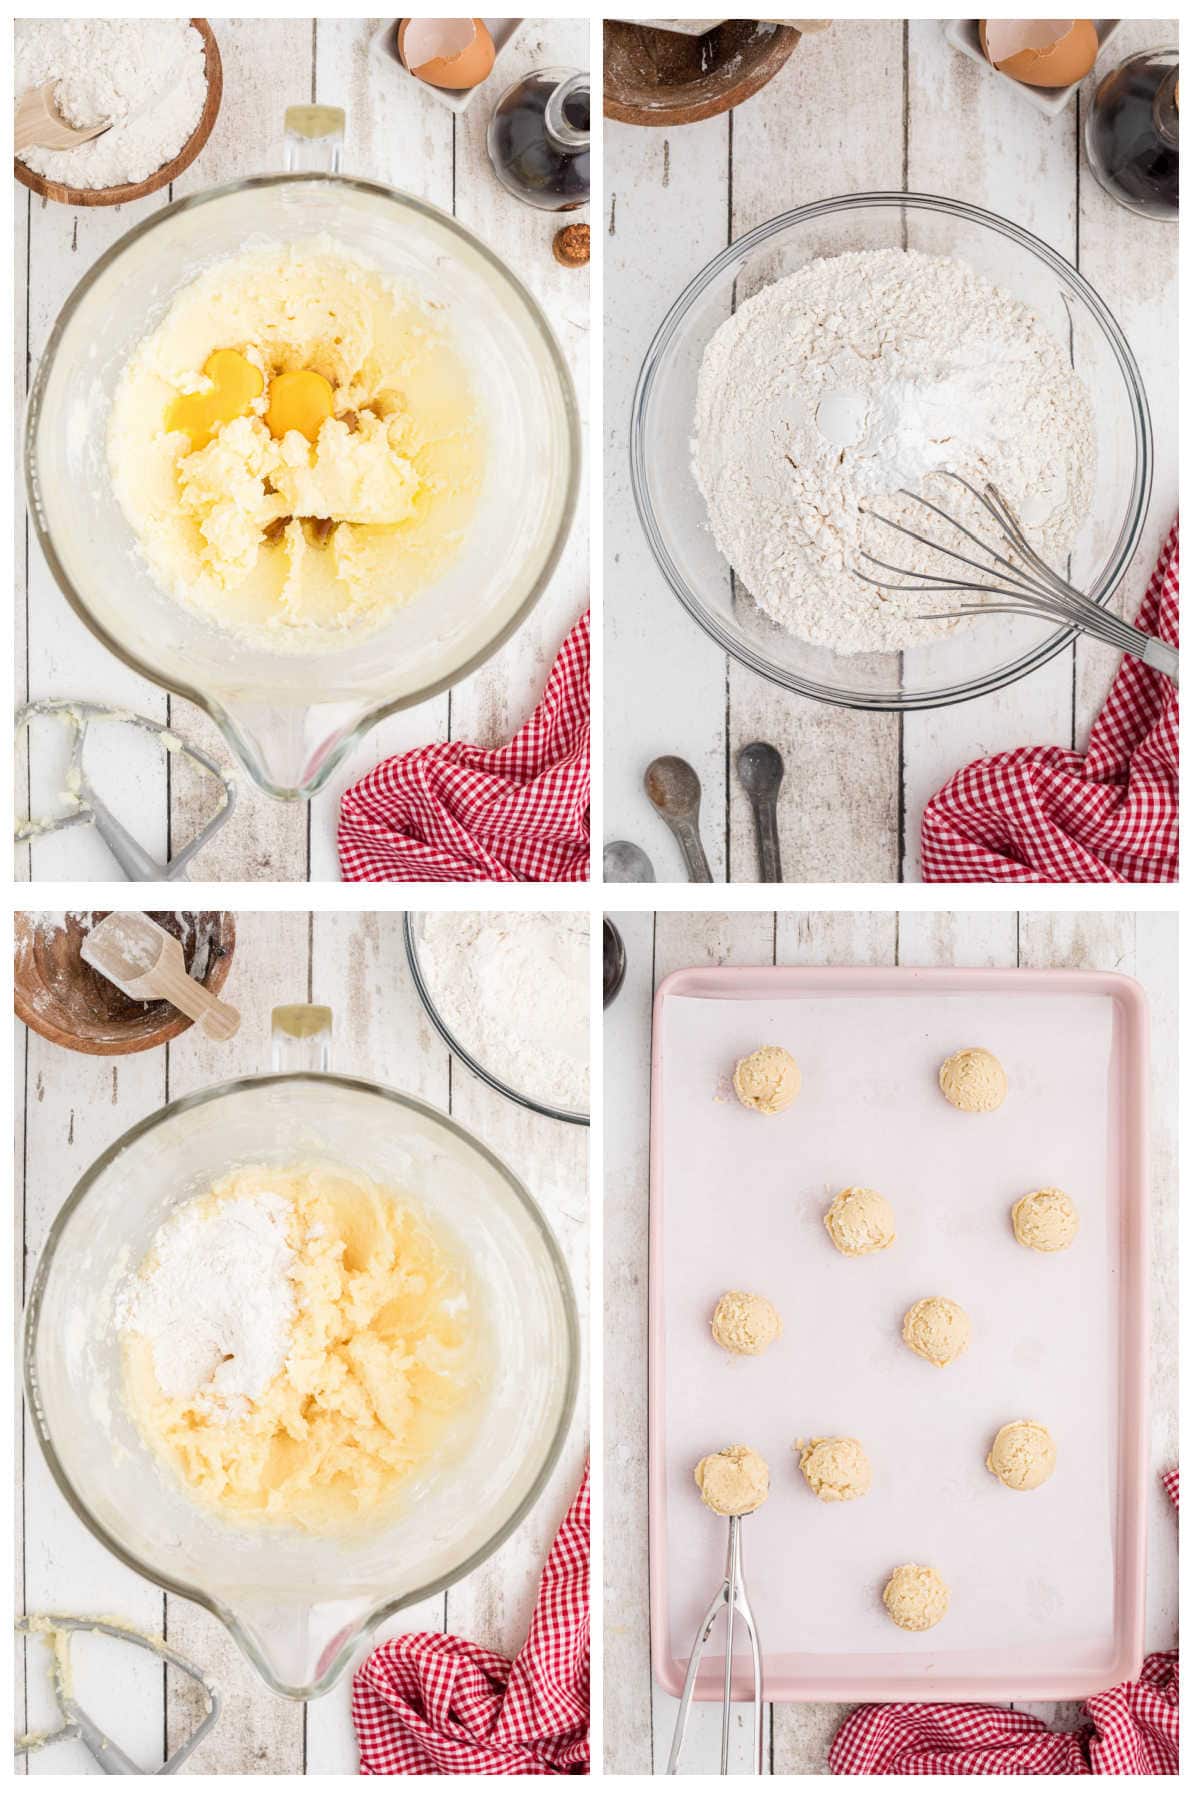 Step by step images showing how to make these sugar cookies.